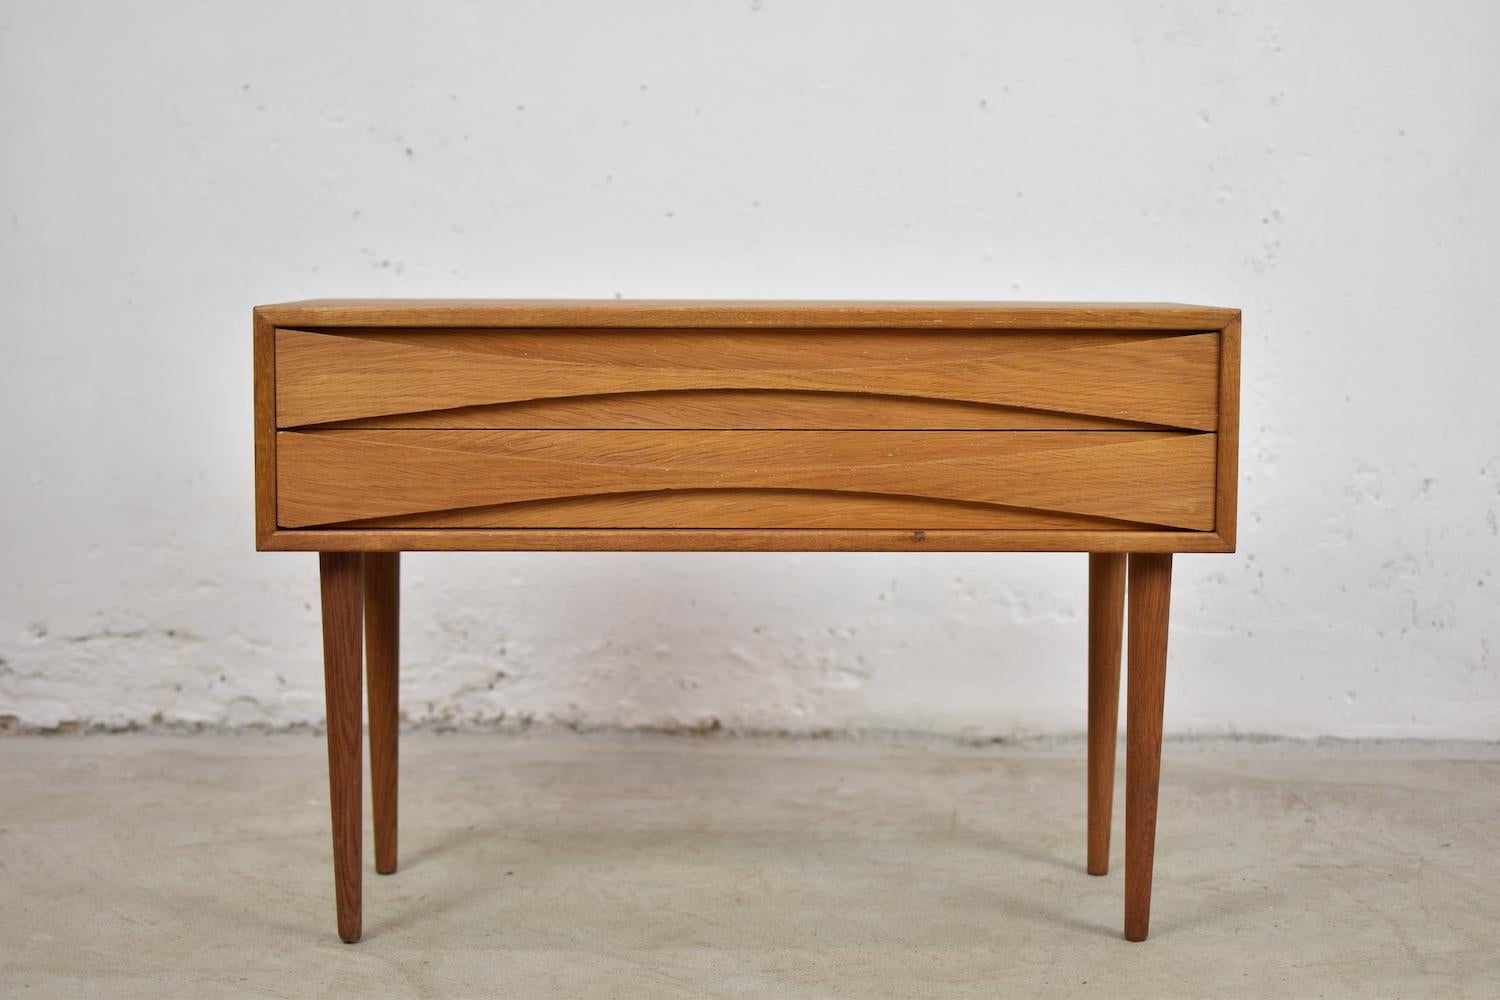 Lovely chest of drawers by Niels Clausen for NC Möbler, Denmark, 1960s. Often presented in teak or rosewood, our chest is made out of oak. Two drawers with scalloped pulls and solid tapered legs. Professionally restored. Rare. Often misattributed to